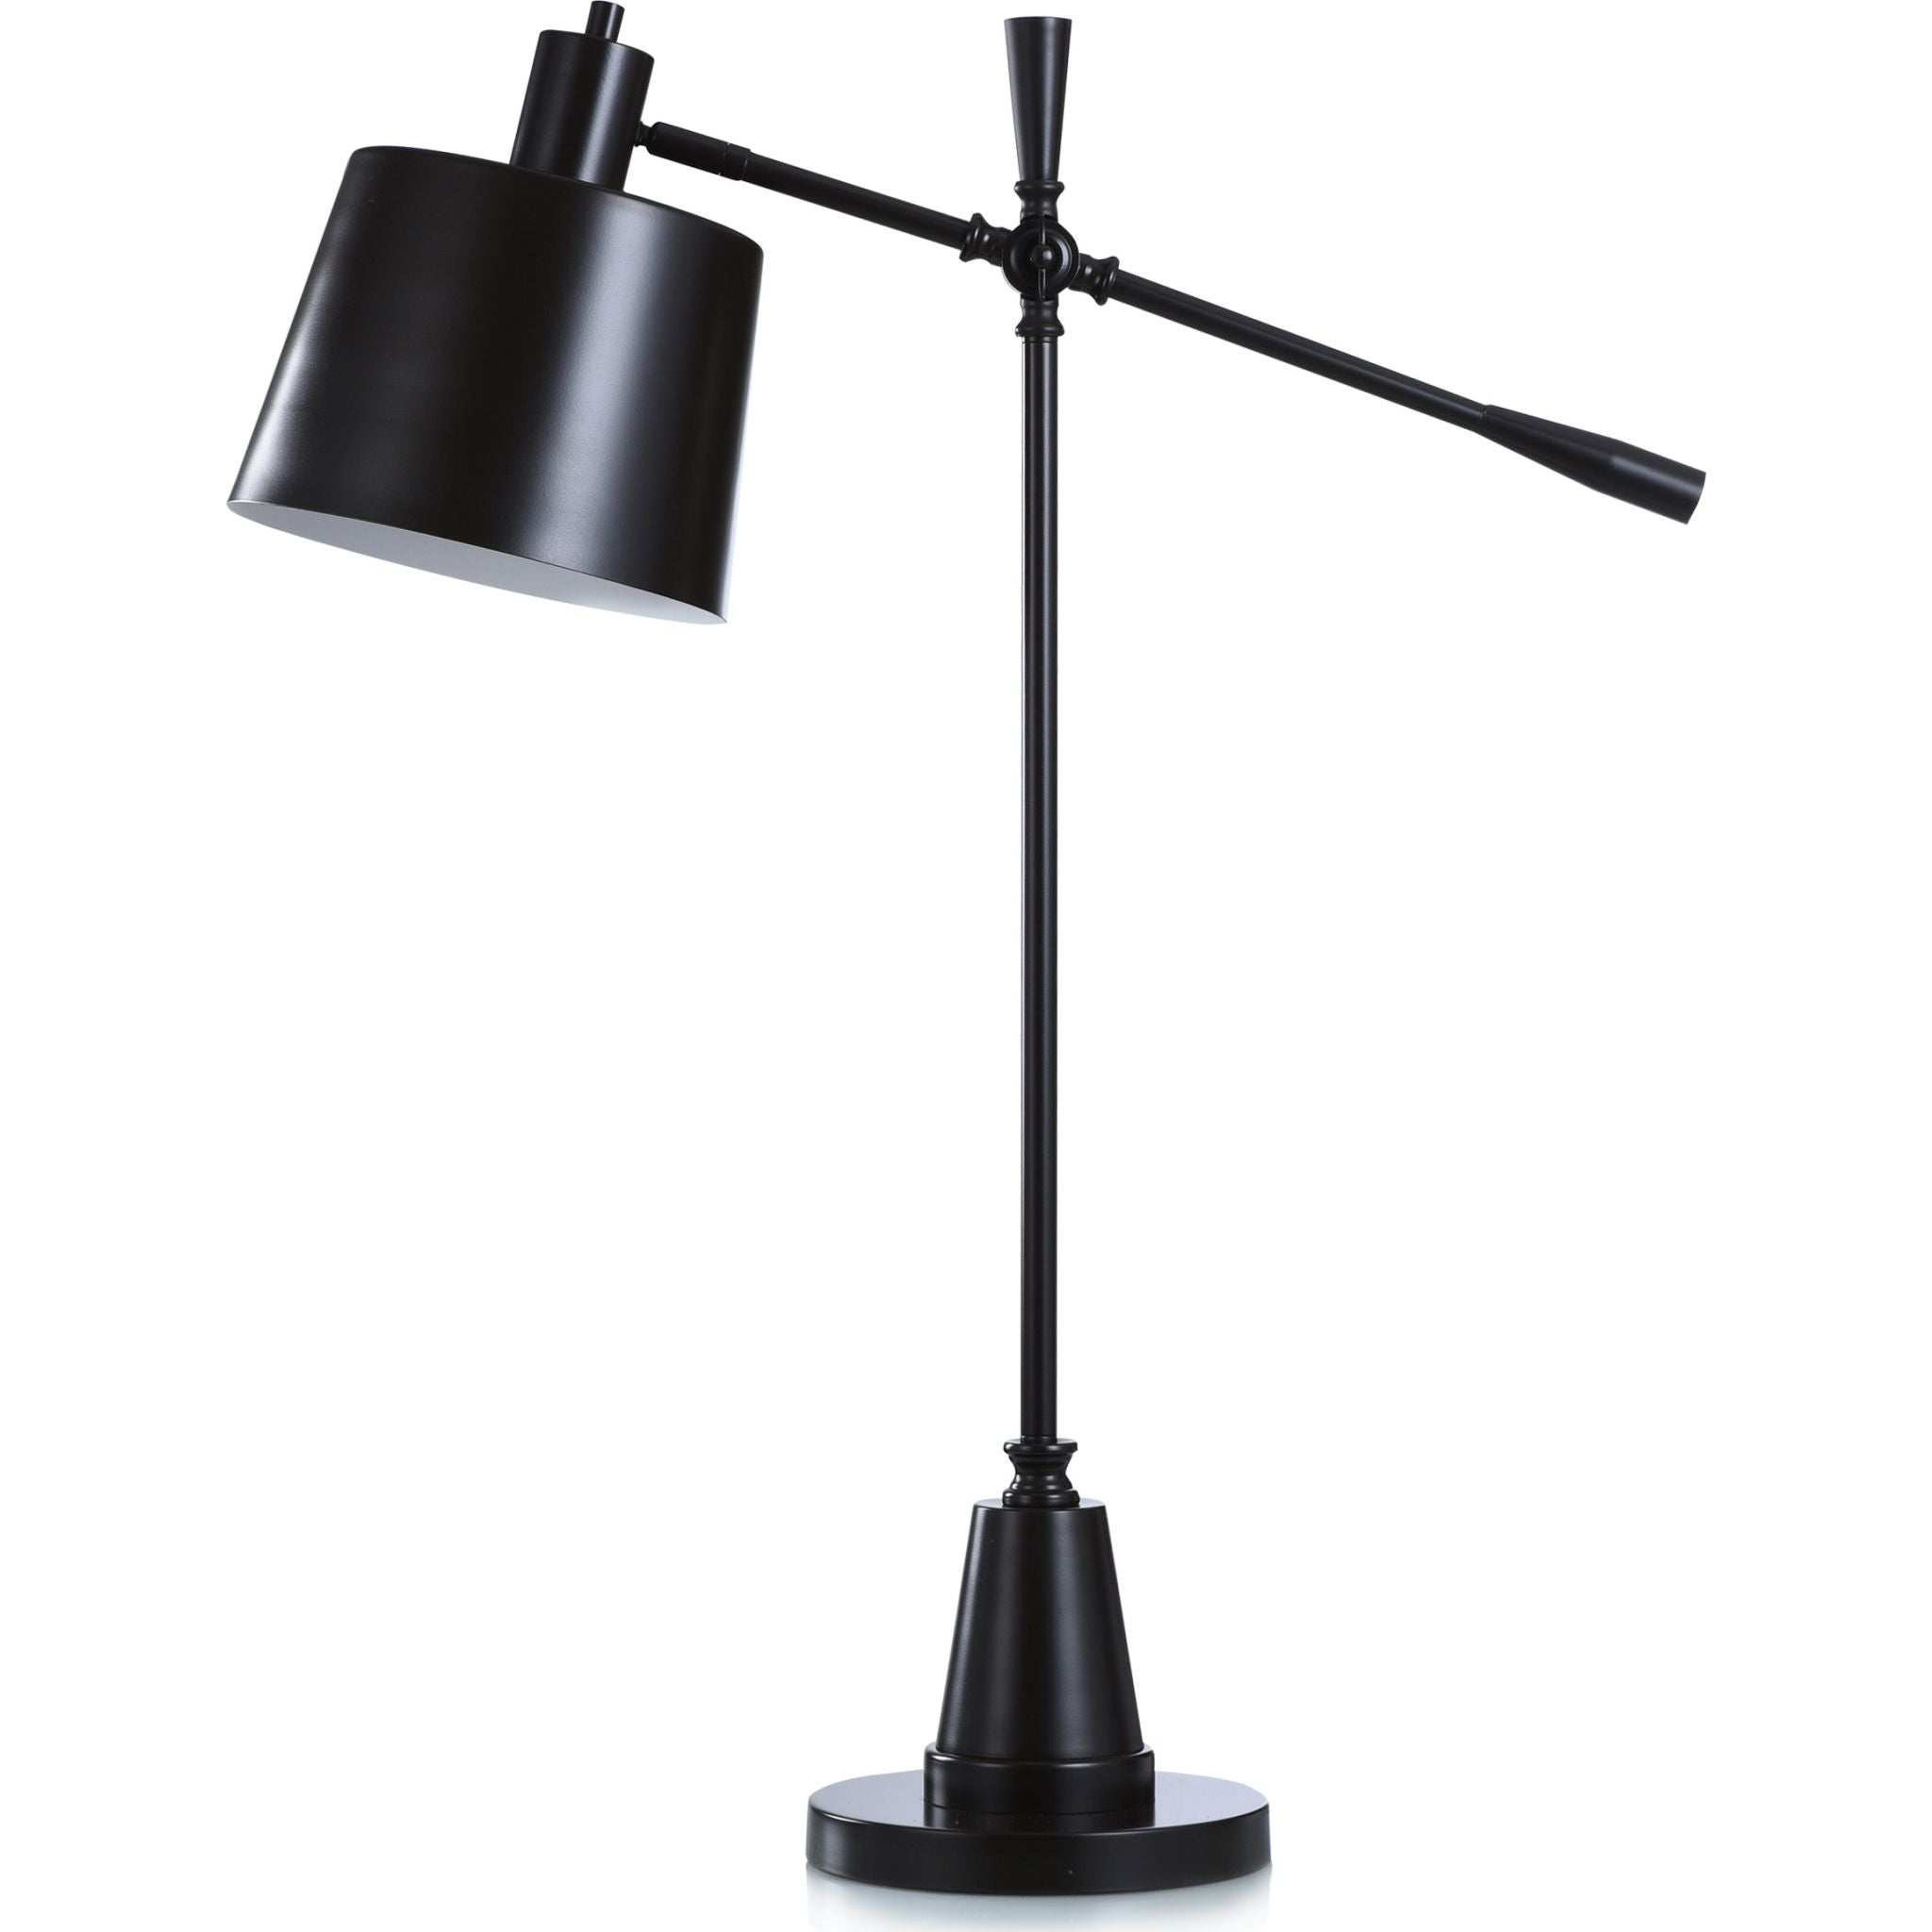 Stylecraft Home Collections Restoration Desk Lamp In Black, Size: 33"